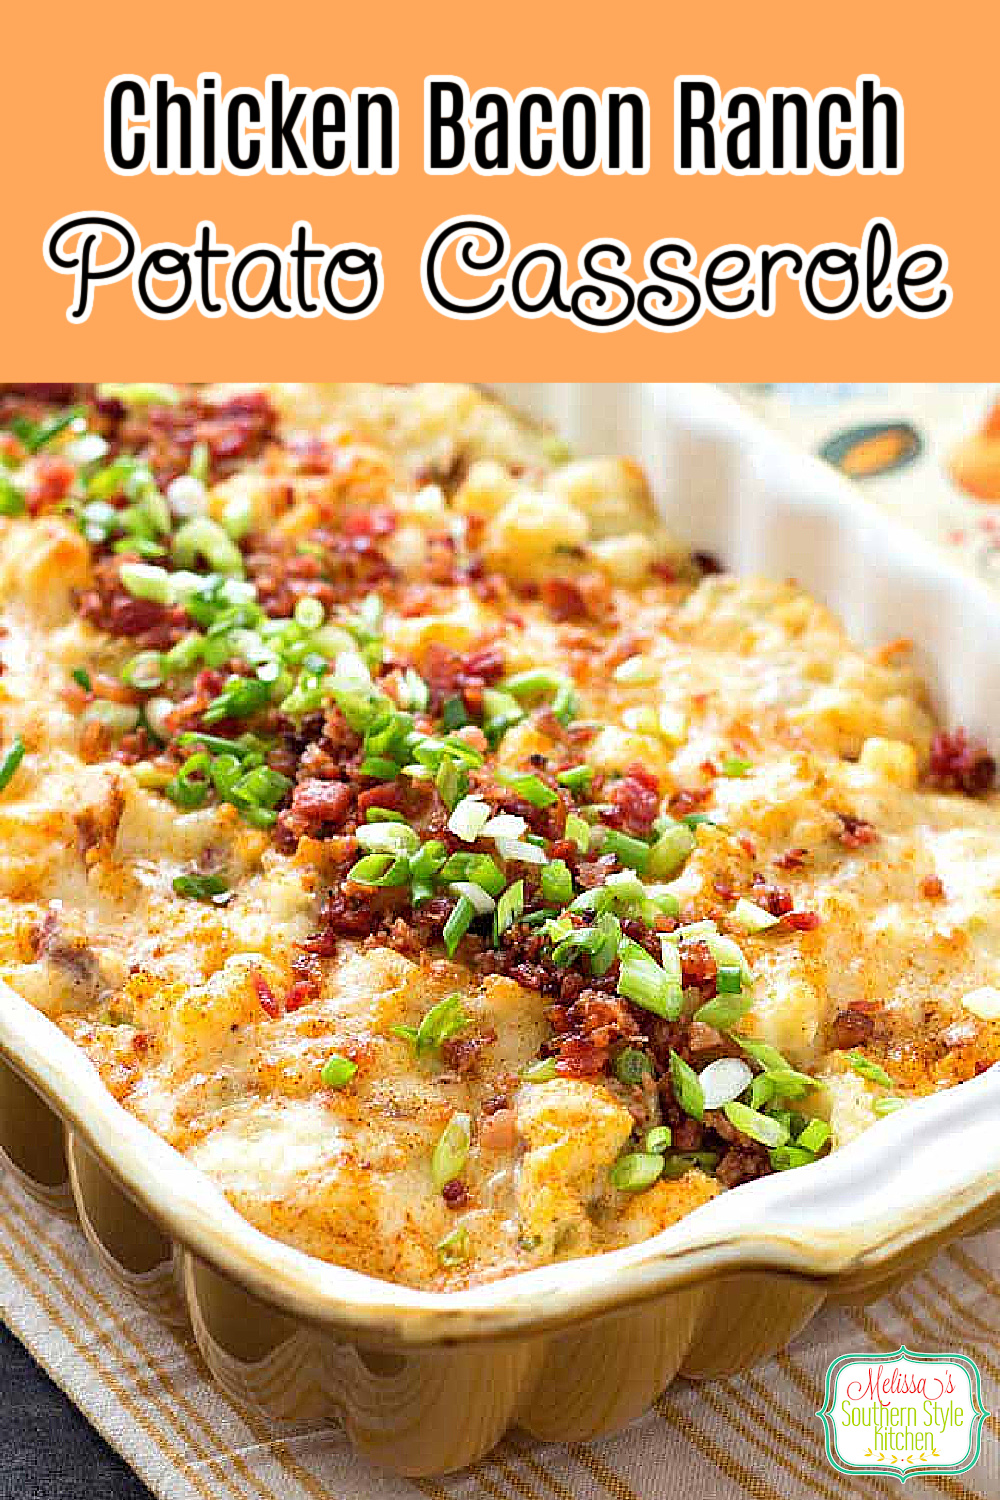 This Chicken Bacon Ranch Potato Casserole is packed with flavor and can double as a side dish or an entrée #potatocasseroles #chicken #chickenbaconranch #chickencasserole #easychickenrecipes #bestpotatocasserolerecipes #baconpotatoes #bacon #southernrecipes #southernfood #melissasssouthernstylekitchen #southernfood #potatoes #twicebakedpotatoes